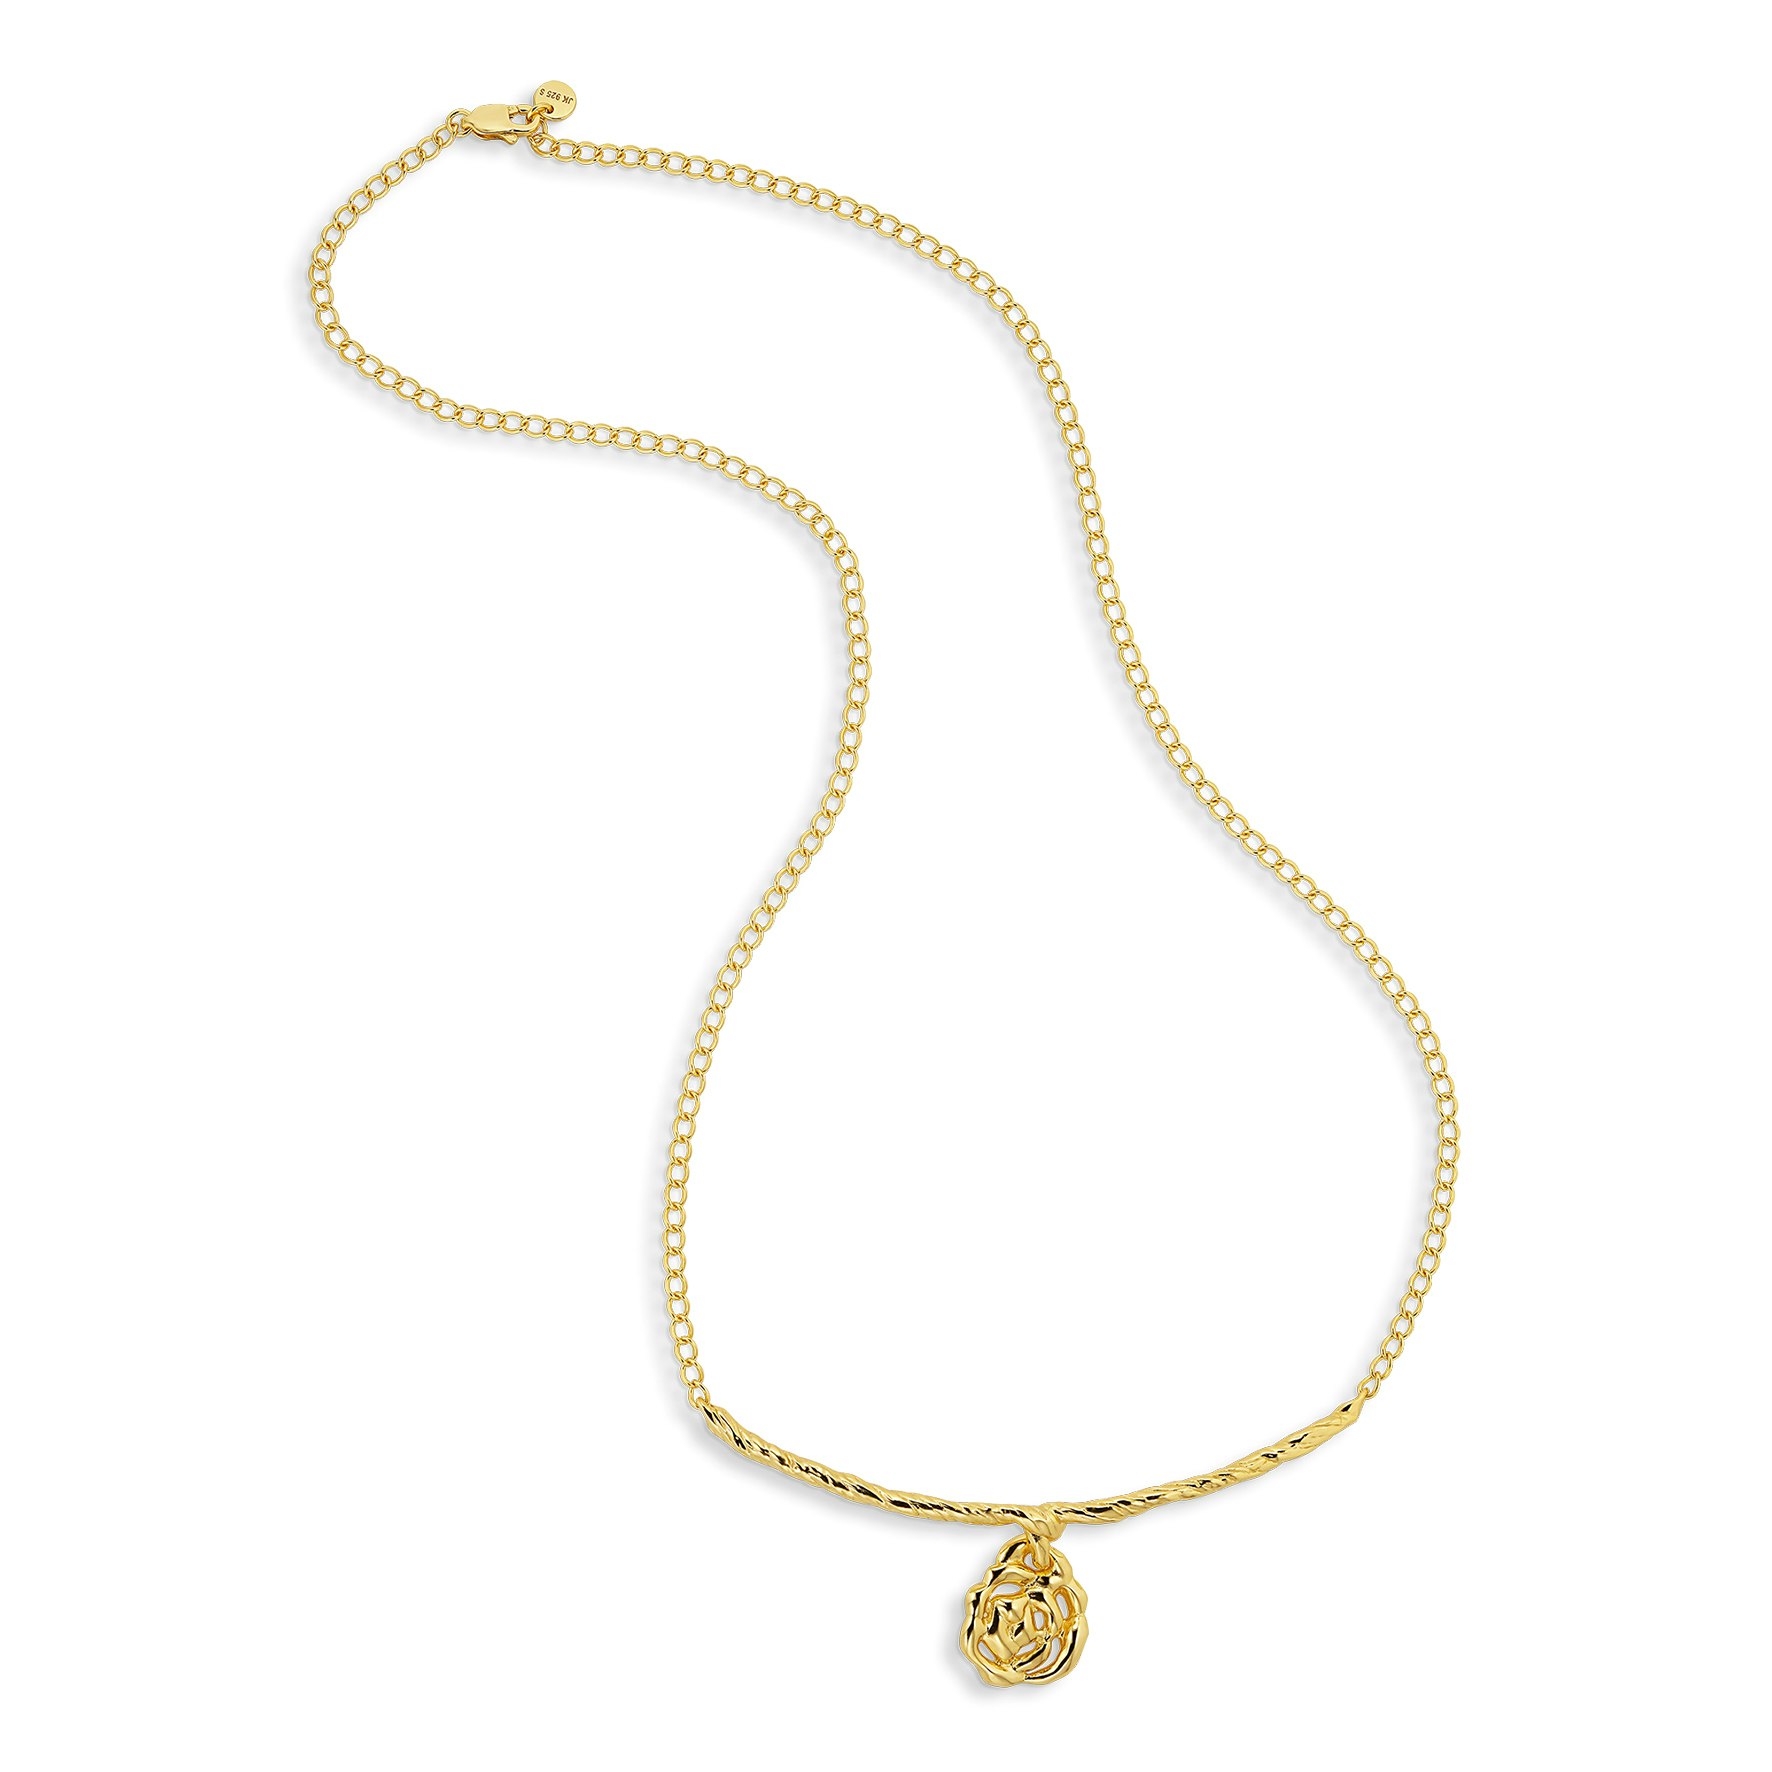 Rosie Necklace from Jane Kønig in Goldplated Silver Sterling 925